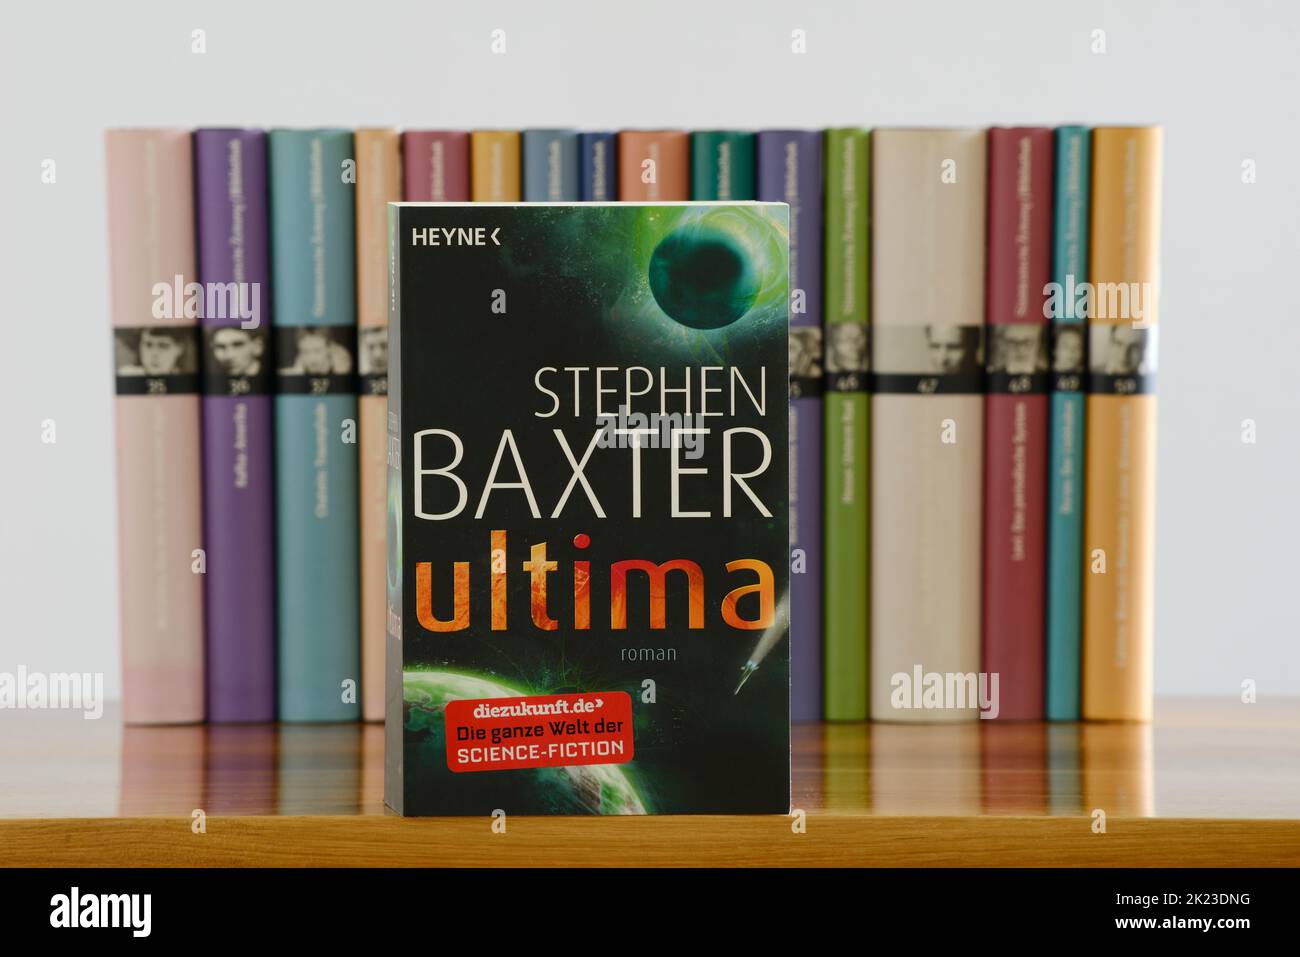 Stephen Baxter Ultima Novel. Note that I do not have a property release on this image and it may be used for editorial only. You cannot use this image Stock Photo